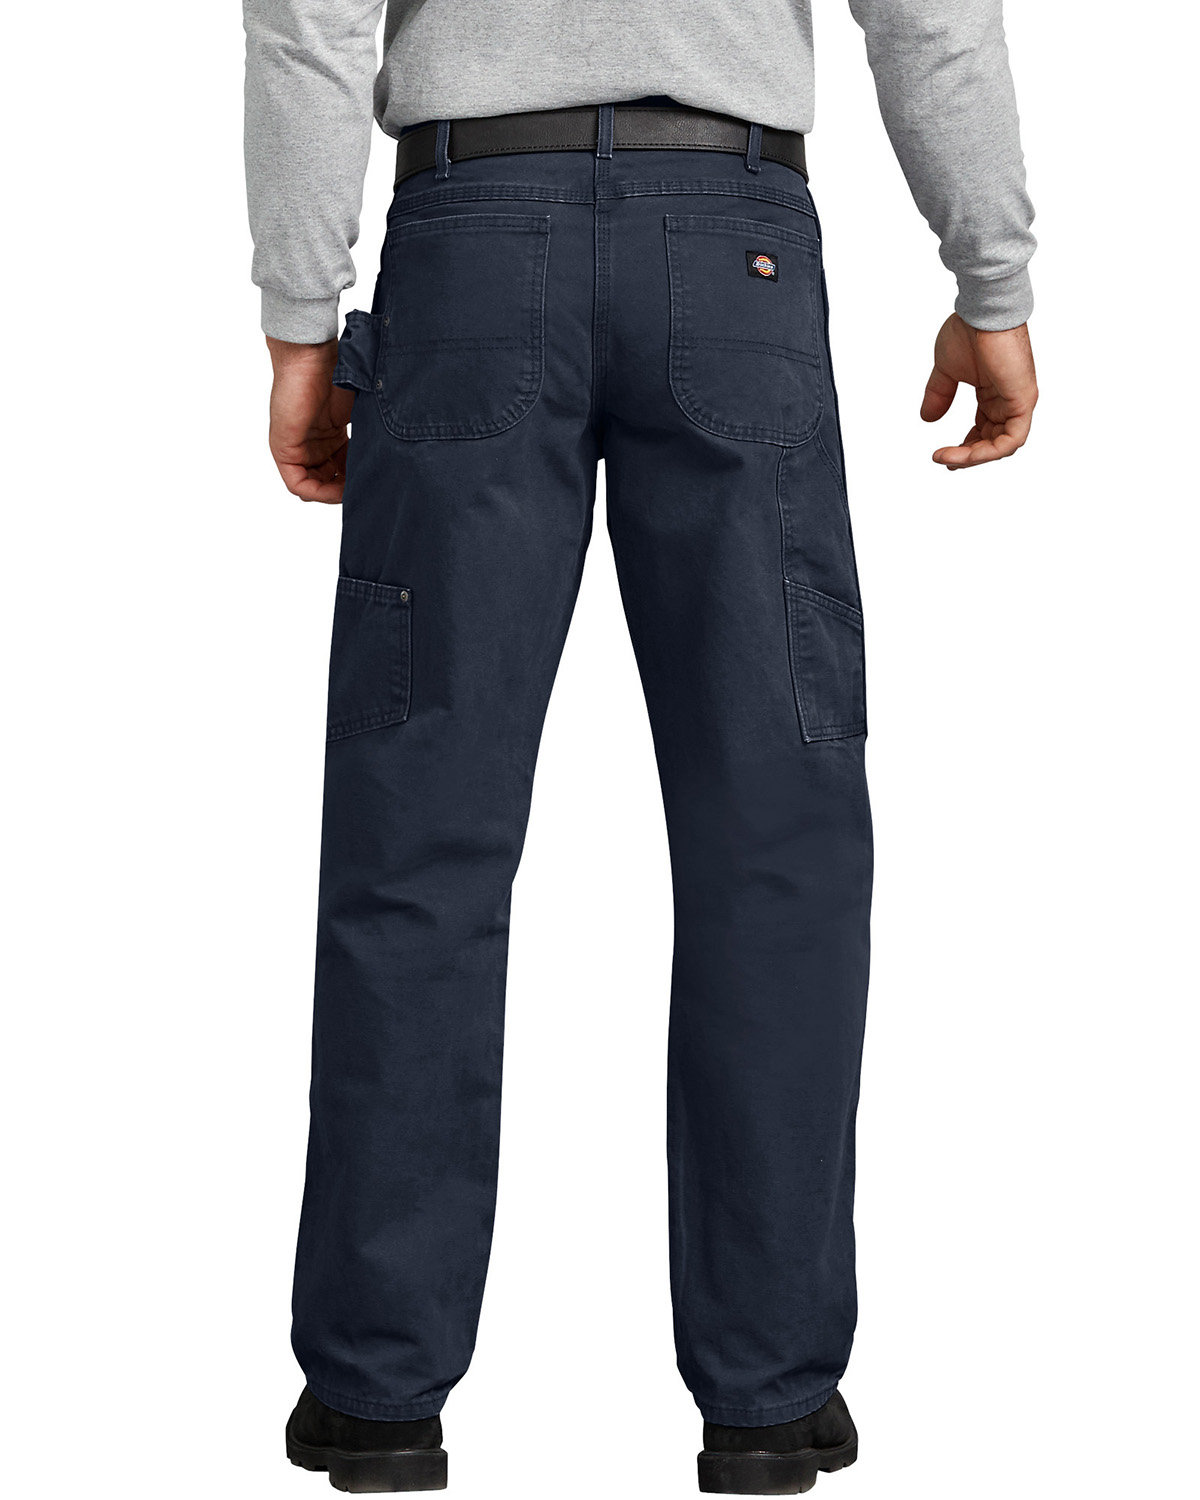 Dickies Men's Relaxed Fit Straight-Leg Carpenter Duck Pant | alphabroder